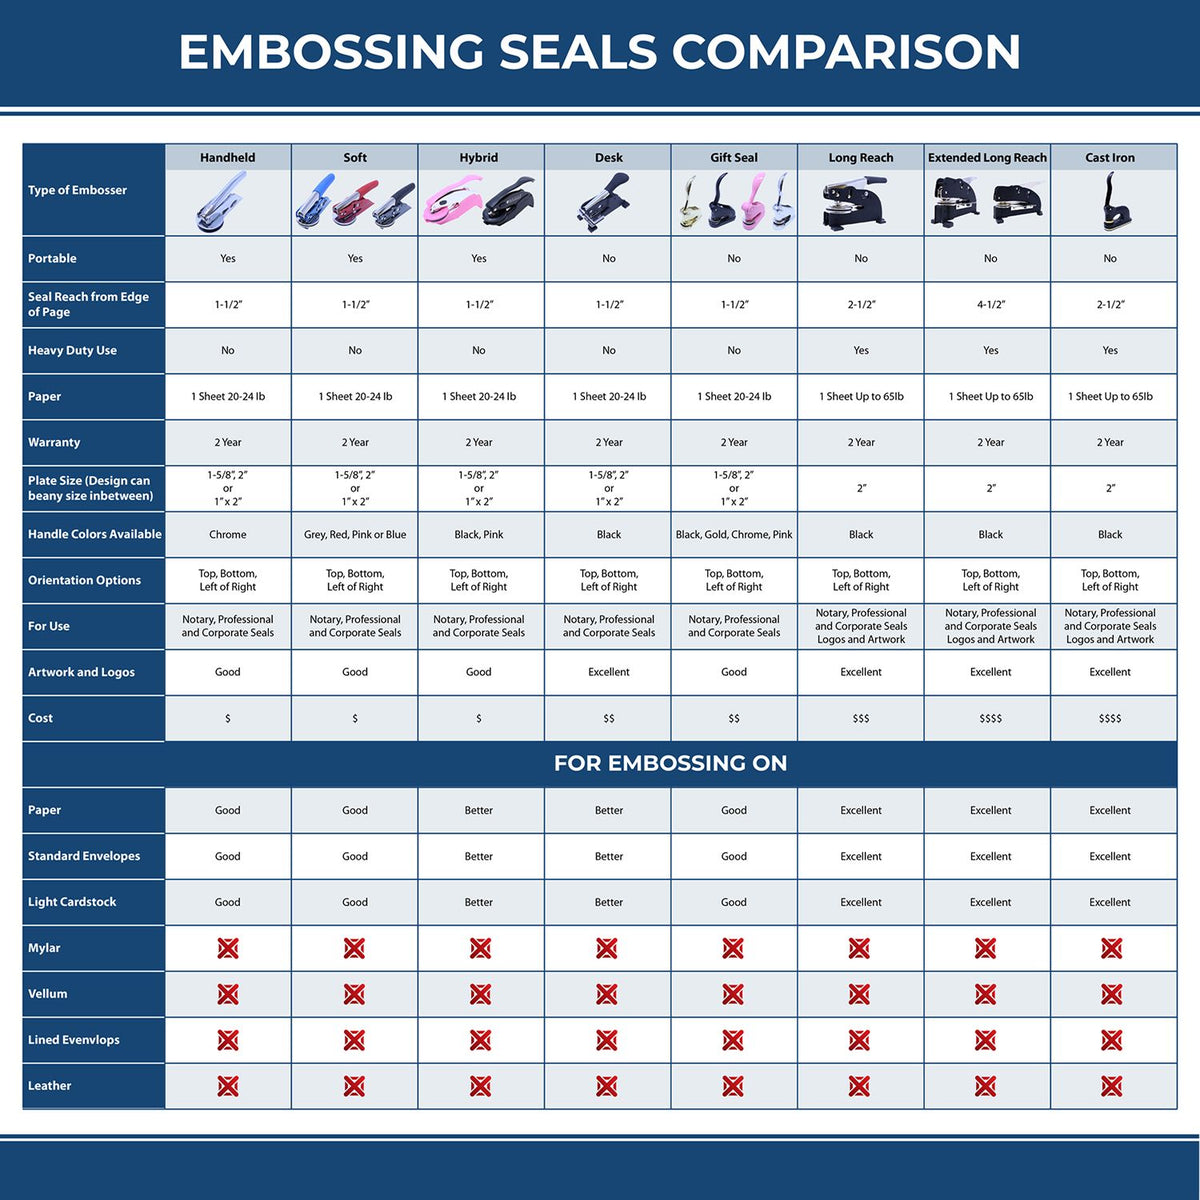 A comparison chart for the different types of mount models available for the Long Reach Alaska Land Surveyor Seal.